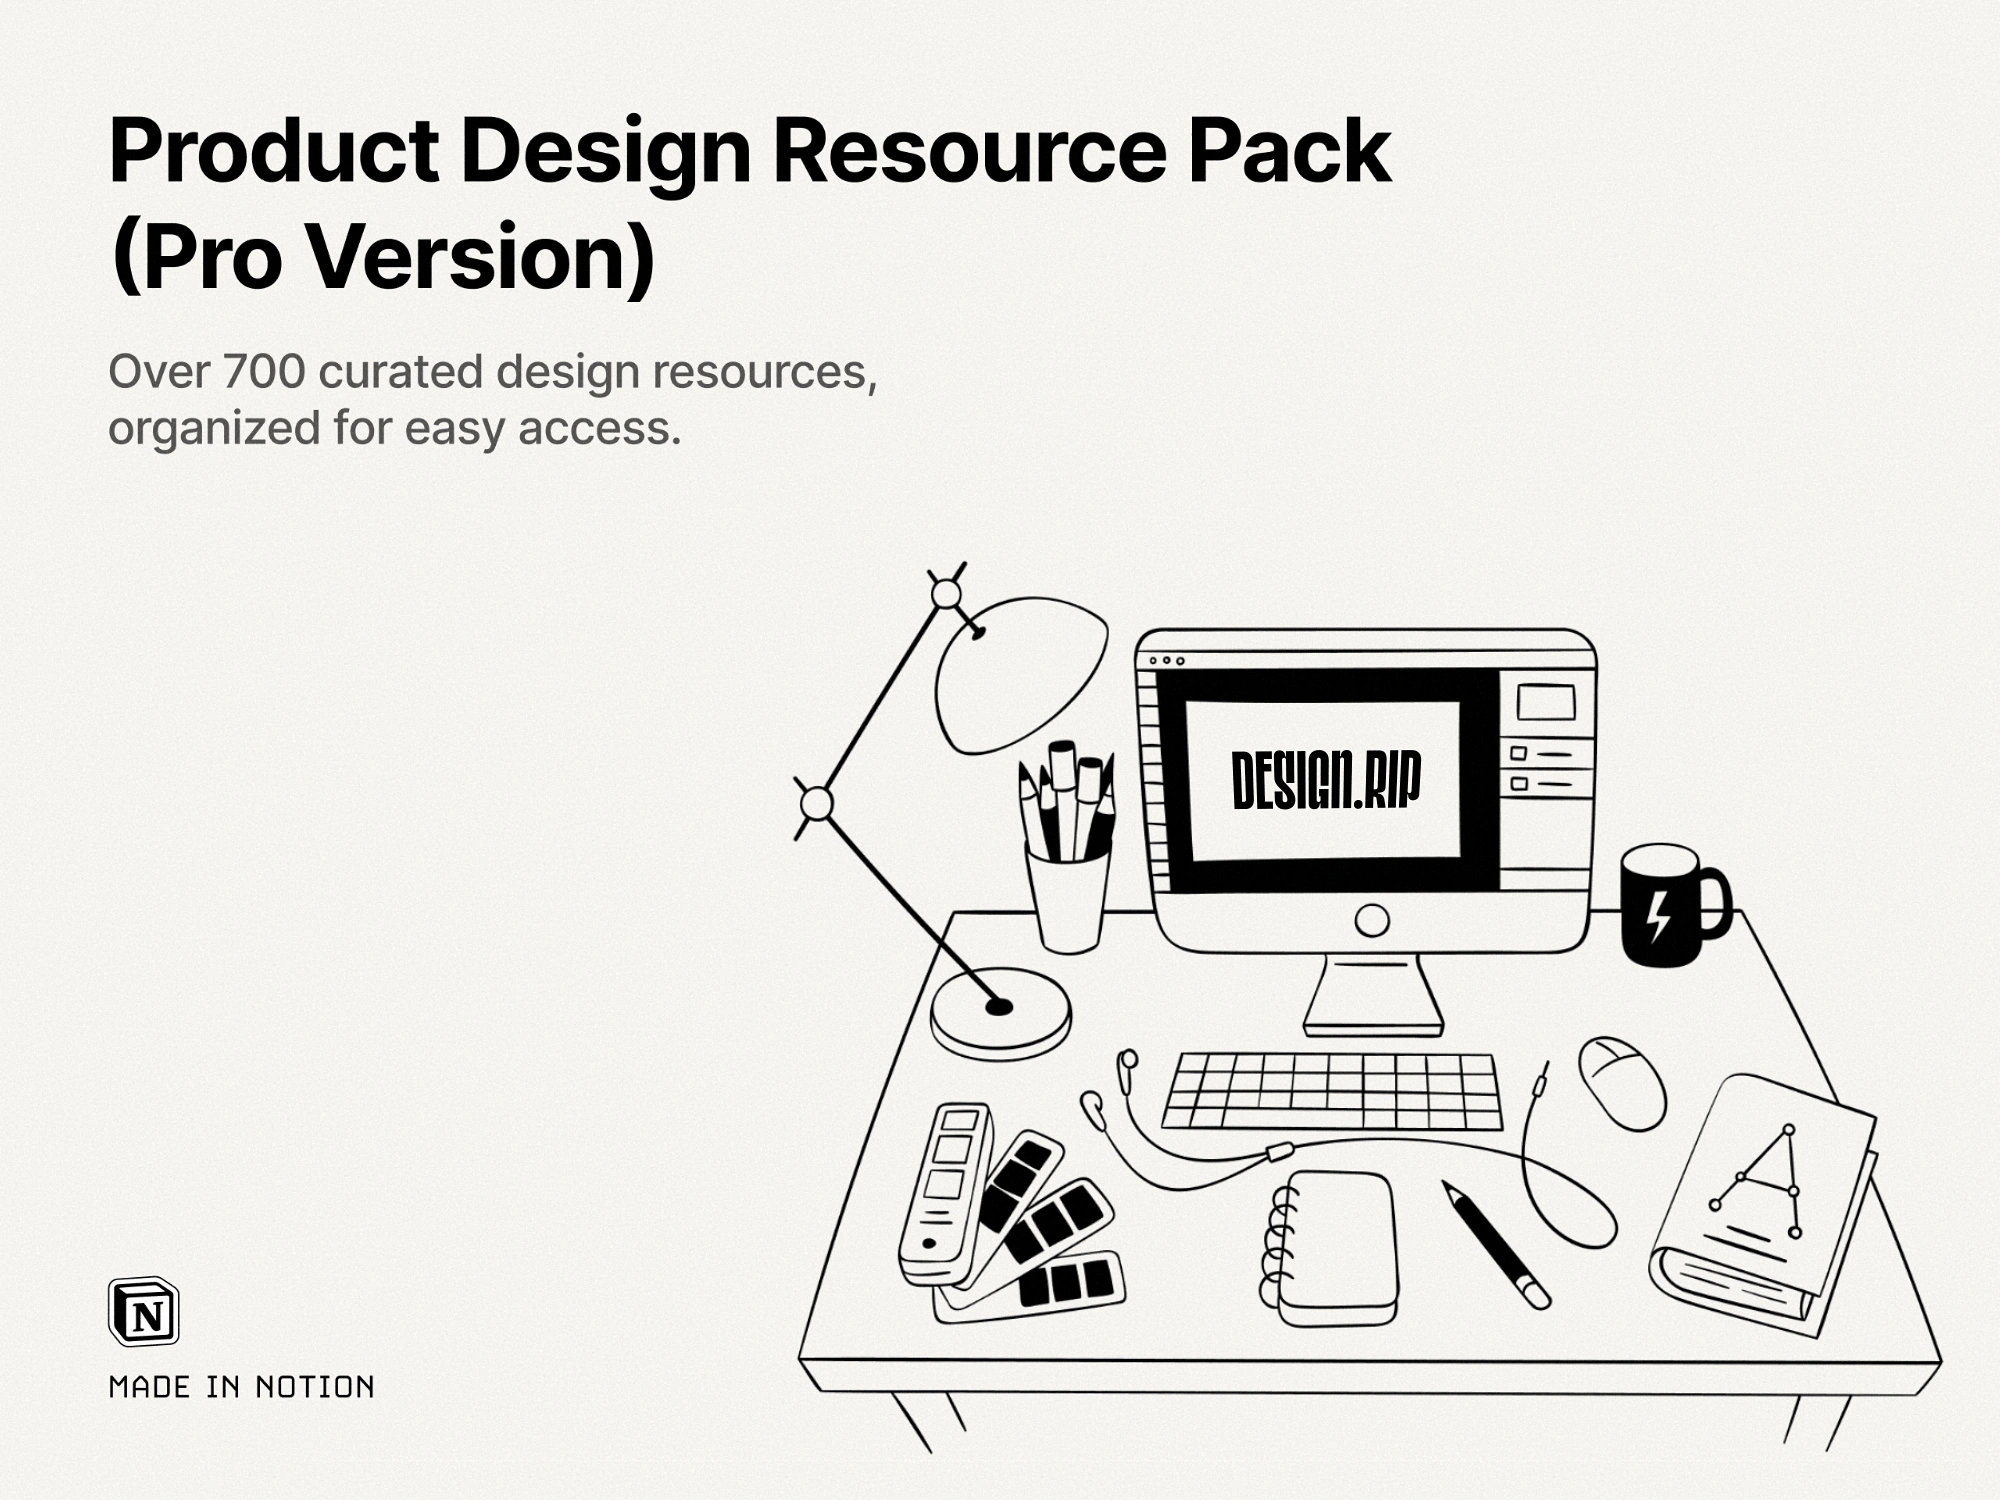 [VIP] Product Design Toolbox: Product Design Resource Pack (PRO)